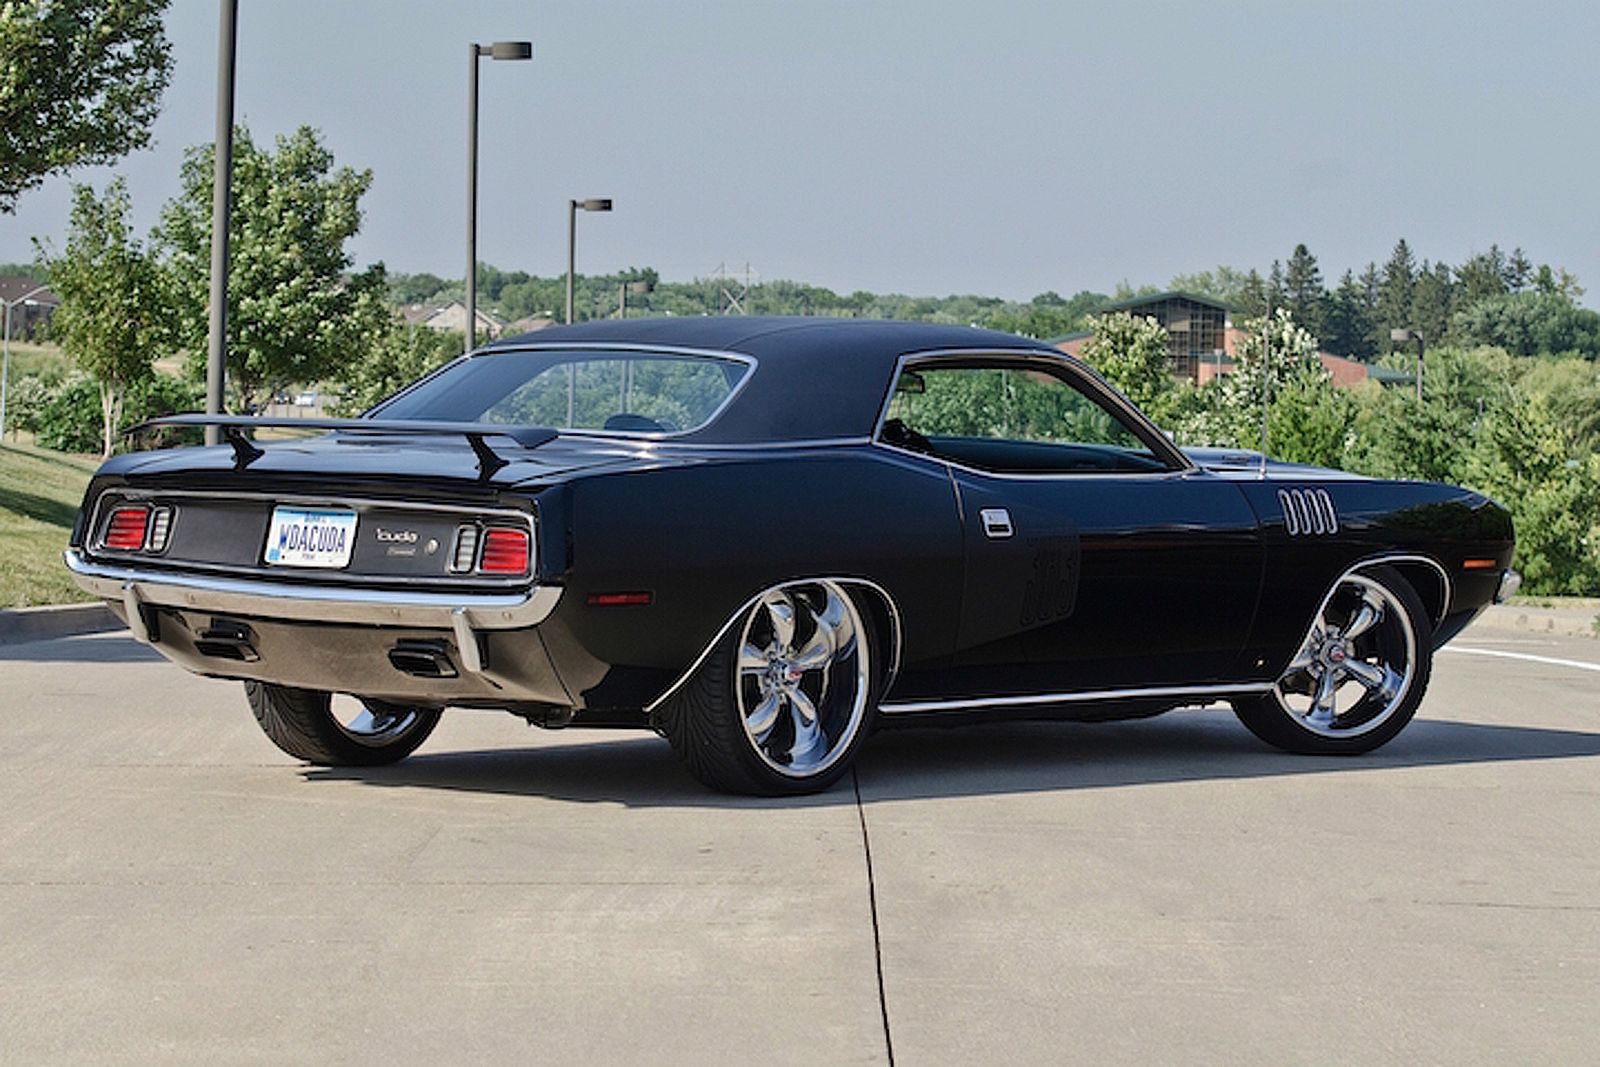 history-of-the-plymouth-barracuda-in-1970-the-cuda-came-into-its-own.jpg